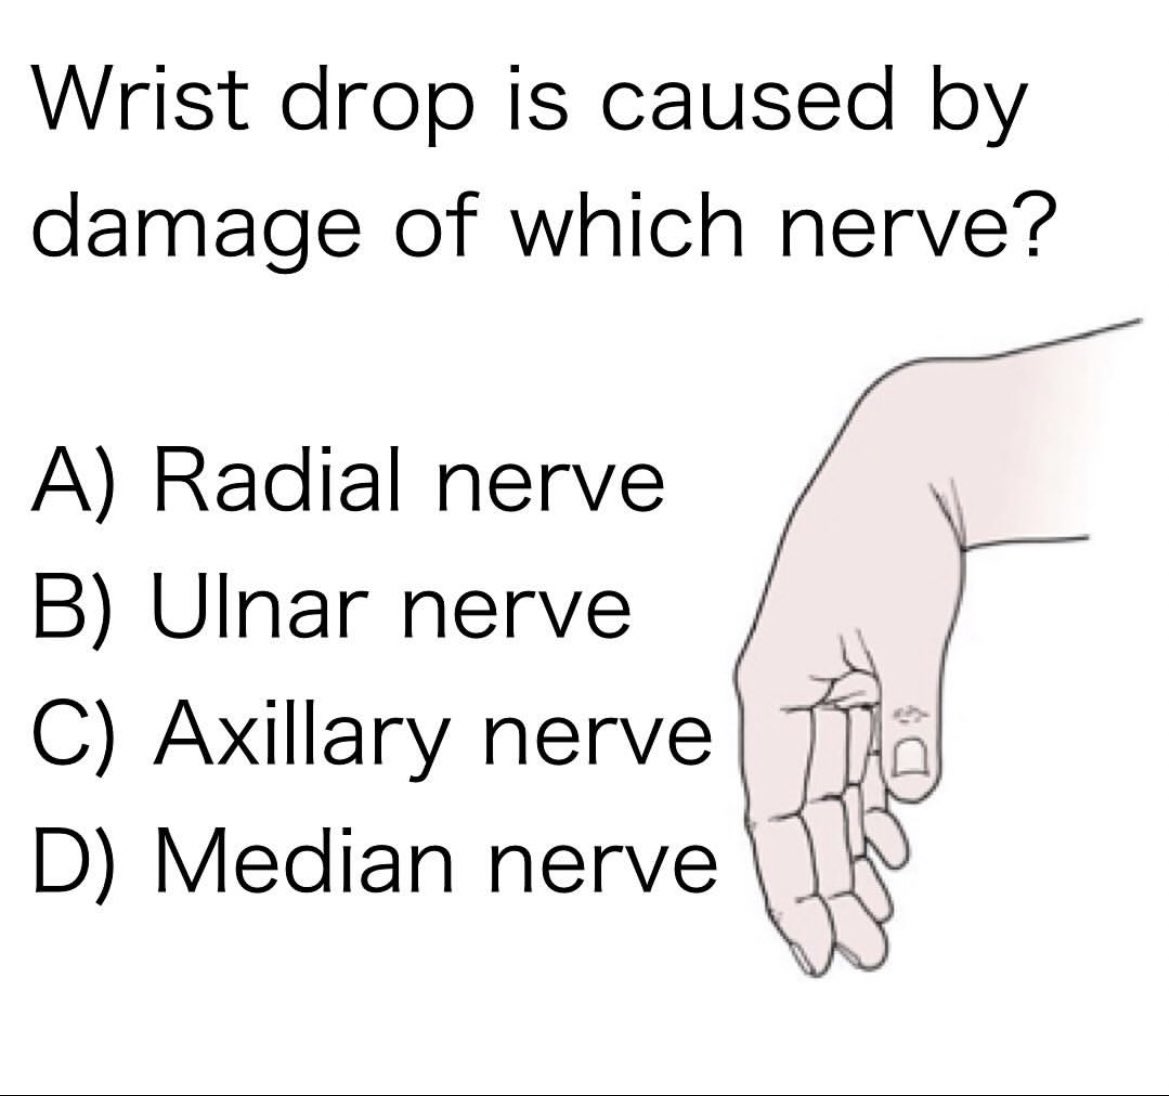 Wrist drop is caused by damage of which nerve?